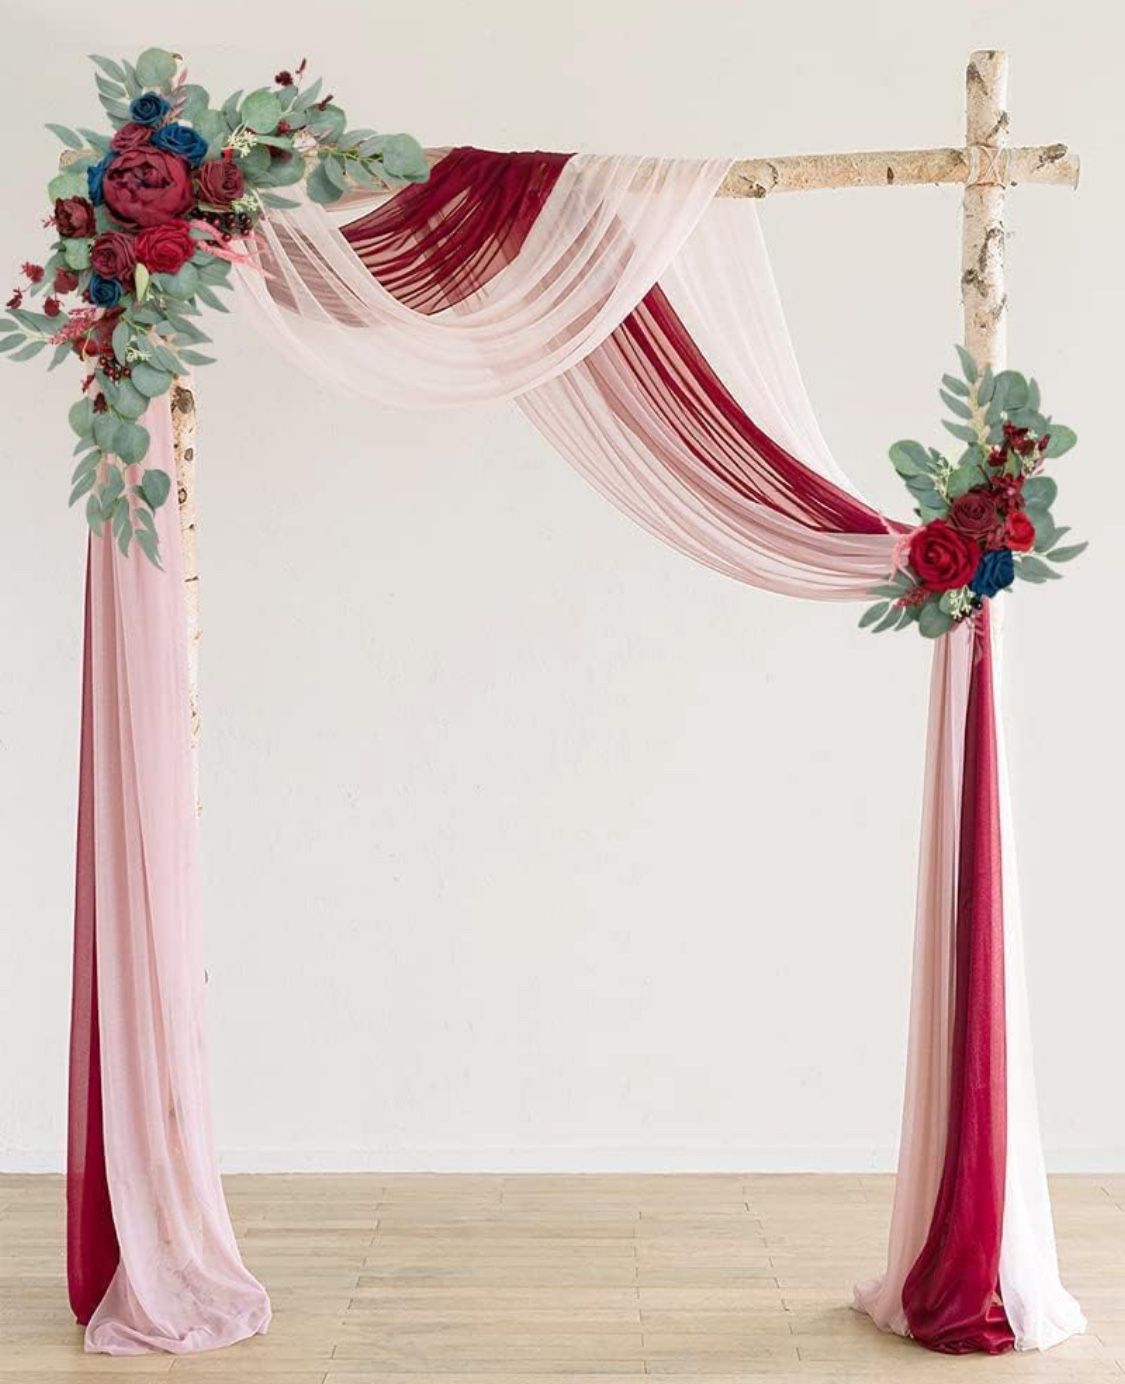 Beautiful Wedding Arch Flowers Artificial Flowers Kit (Pack of 2)- Red Rose Peony Flower Arch Decor and Welcome Sign Wedding Chair Arrangements Party